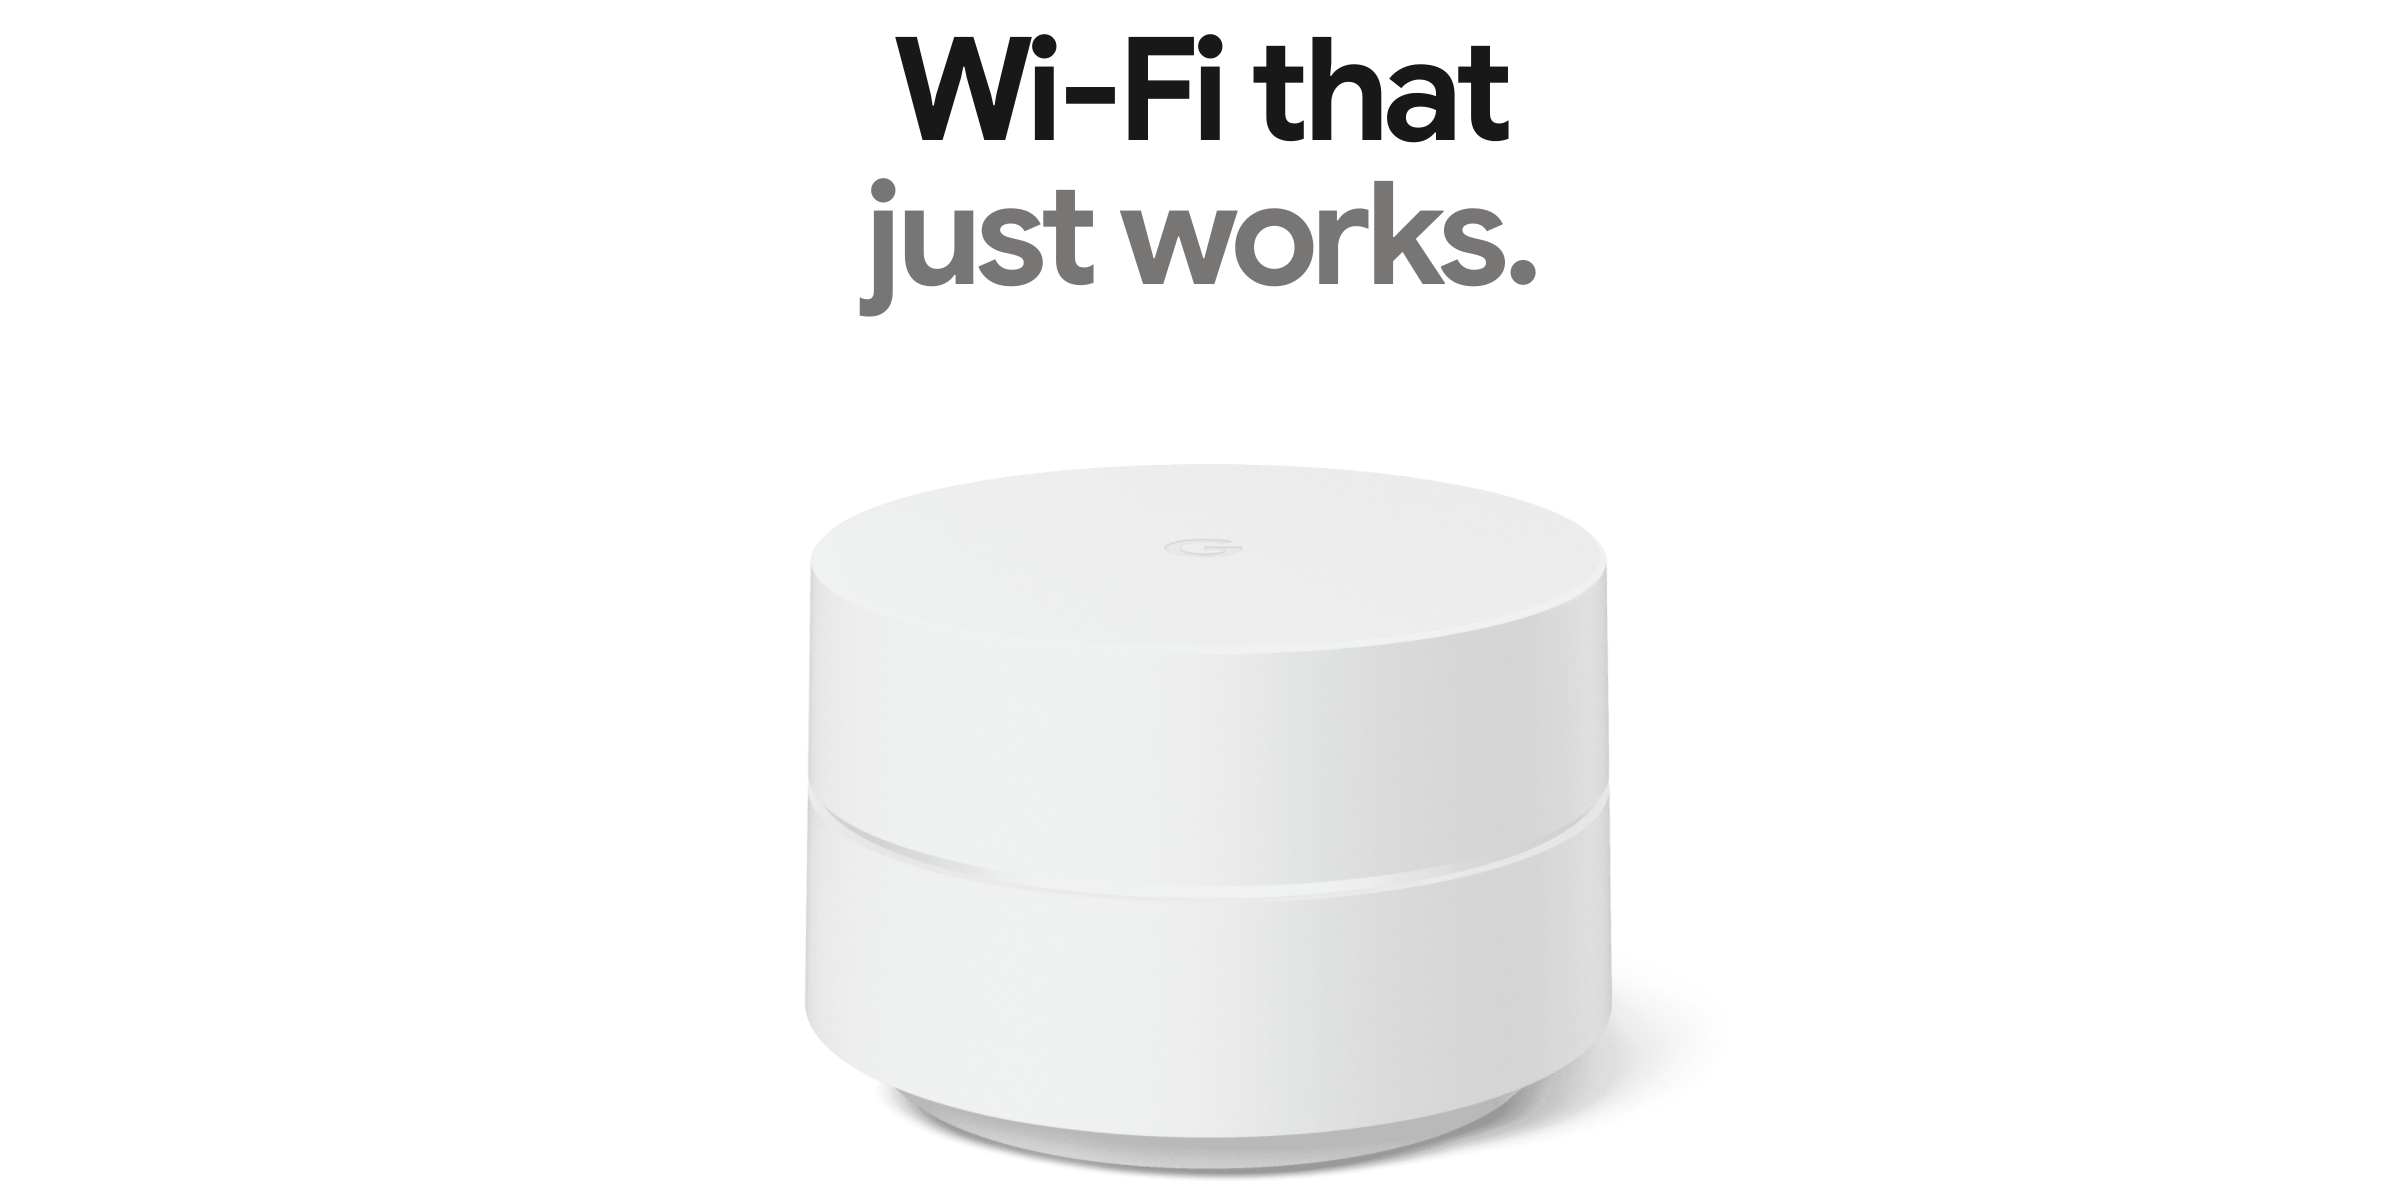 New Google Wifi quietly relaunched starting at $99 - 9to5Google